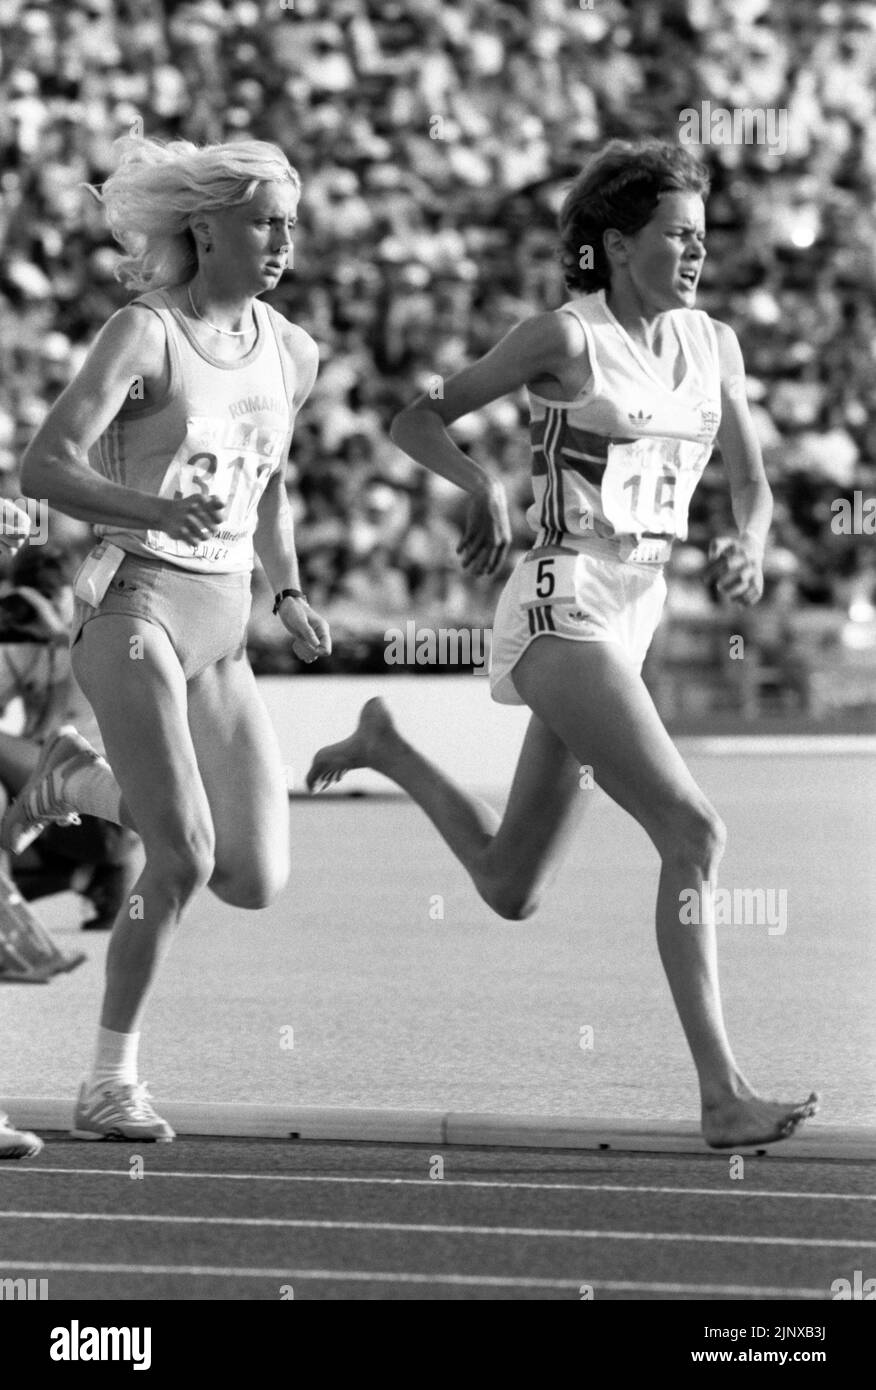 OLYMPIC SUMMER GAMES IN LOS ANGELES 1984MARICICA PUICA Romania and Zola Budd South African/British runners at 3000m Stock Photo